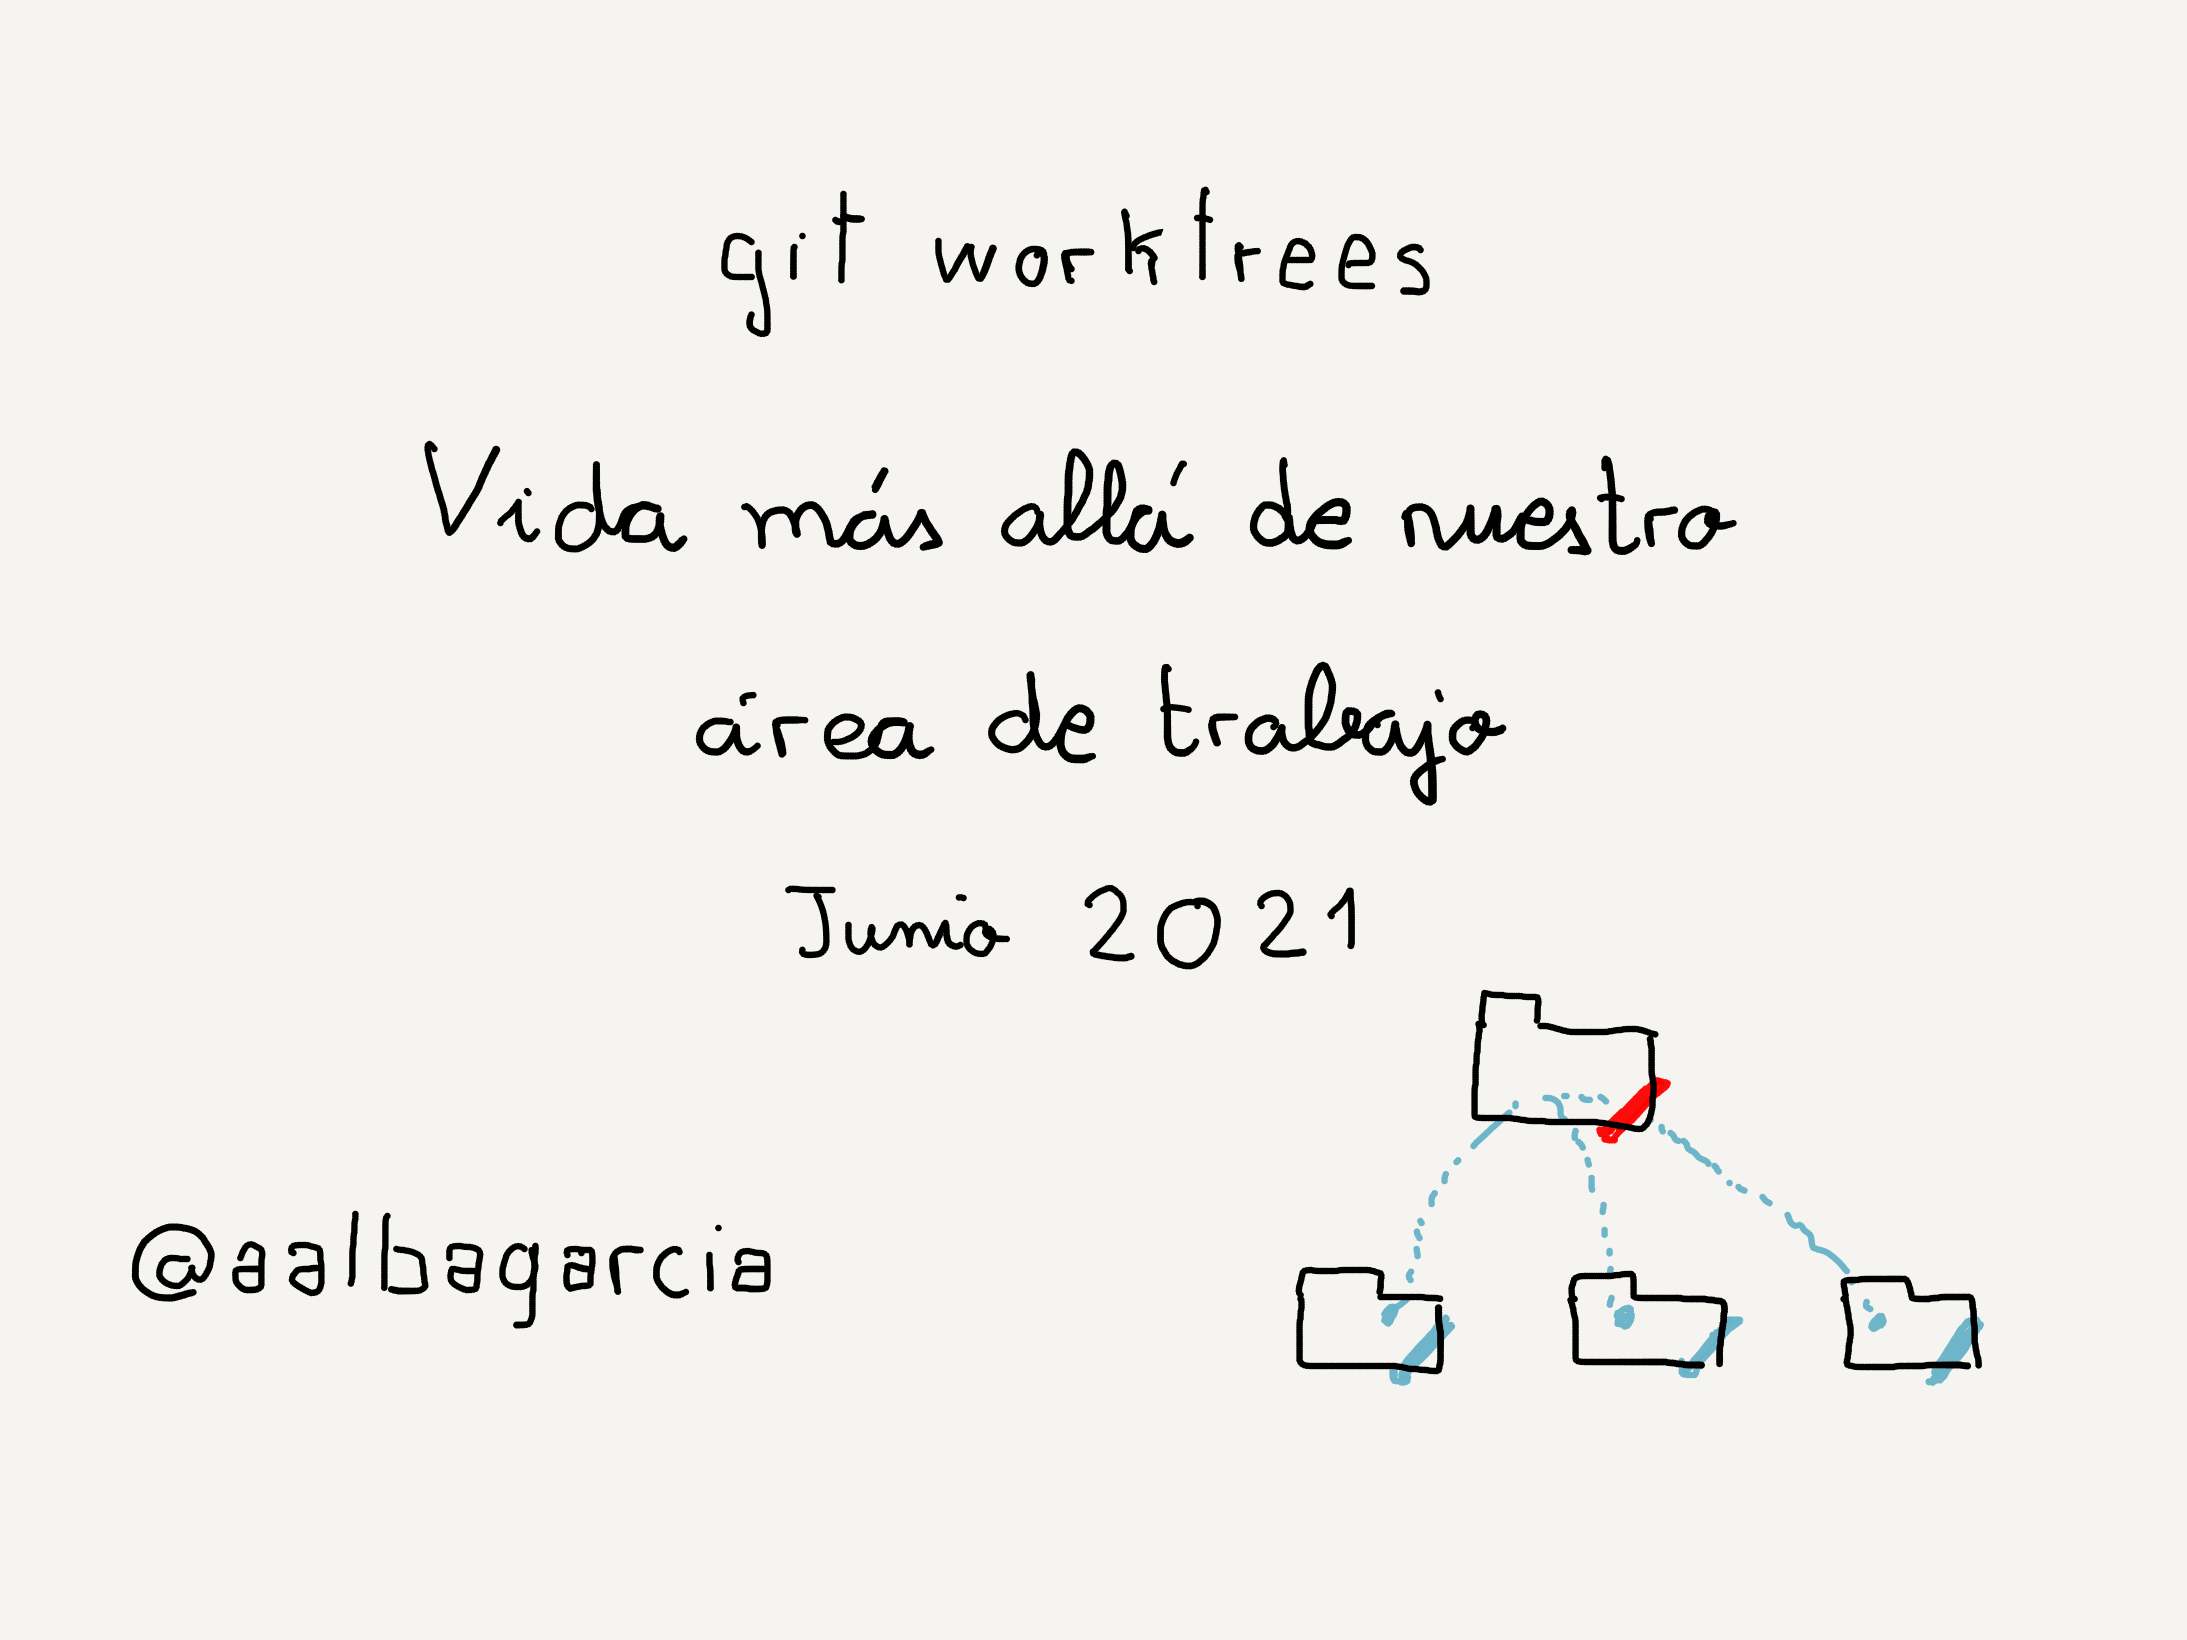 images/Paper.Talk_Git_worktrees.1.PNG